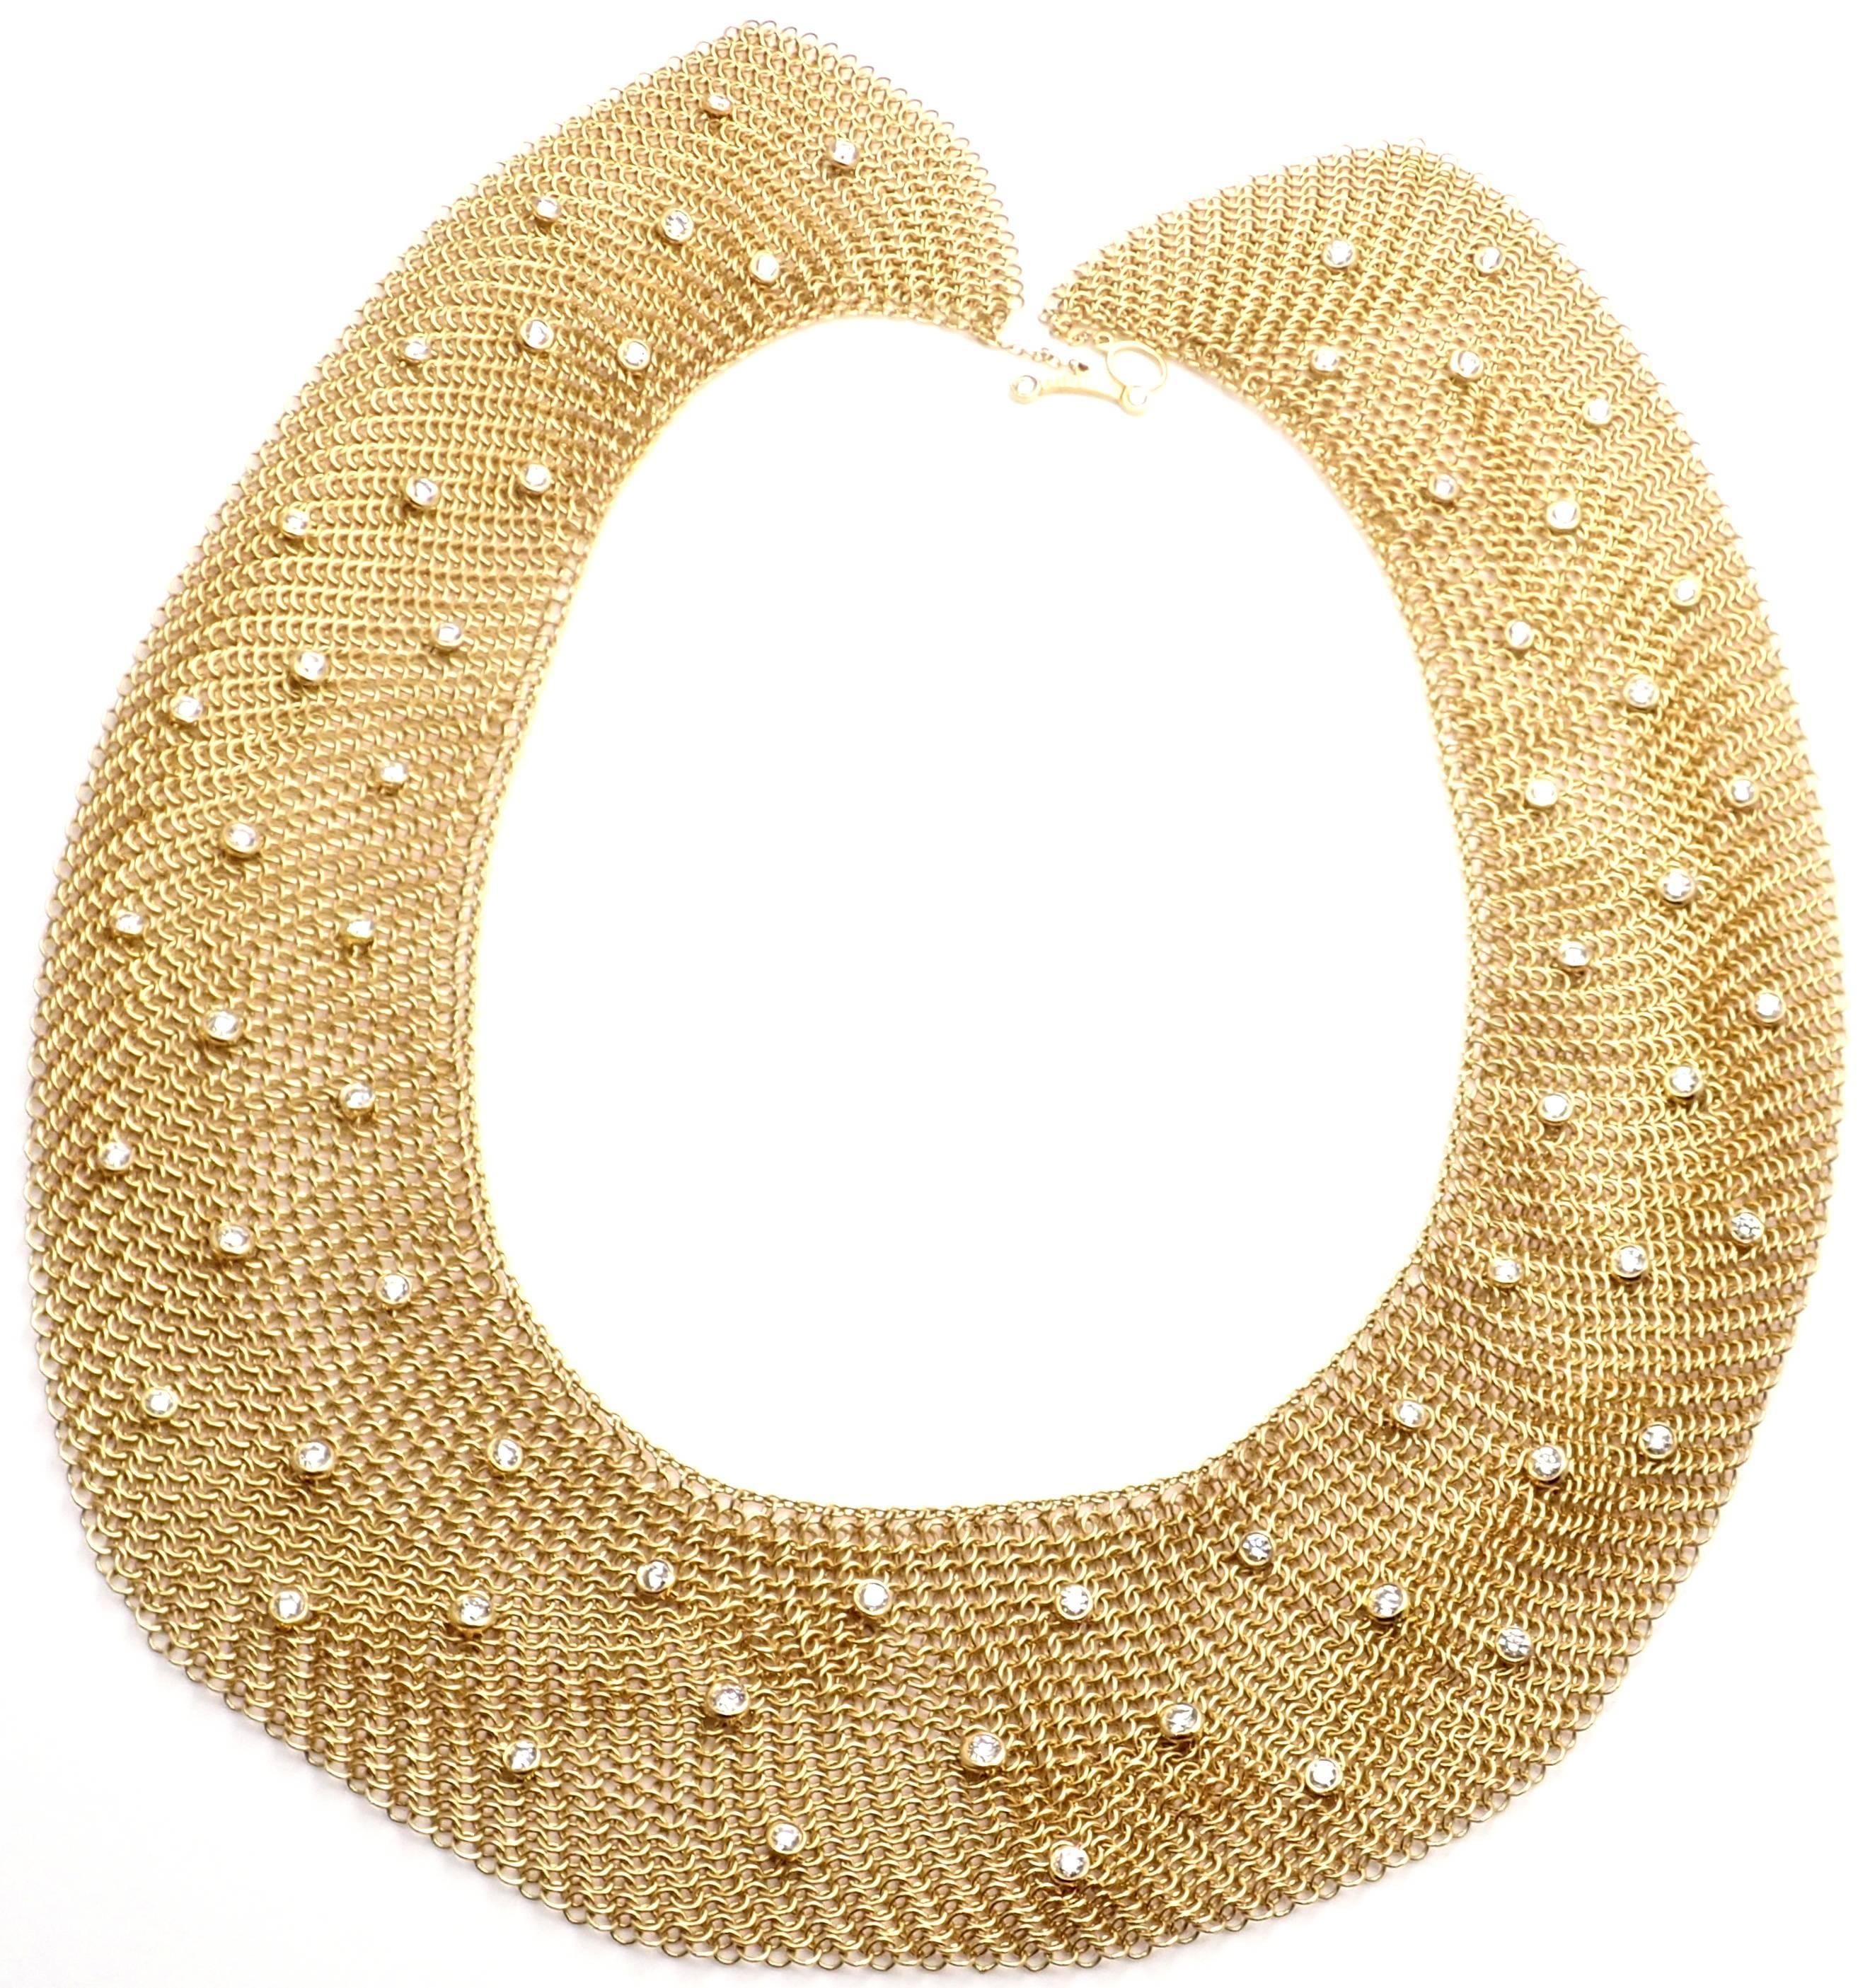 18k Yellow Gold Diamond Mesh Large Necklace by Elsa Peretti for TIffany & Co. 
With 66 Round brilliant cut diamonds VS1 clarity, G color total weight approx. 3.5ct
Details:
Length 16